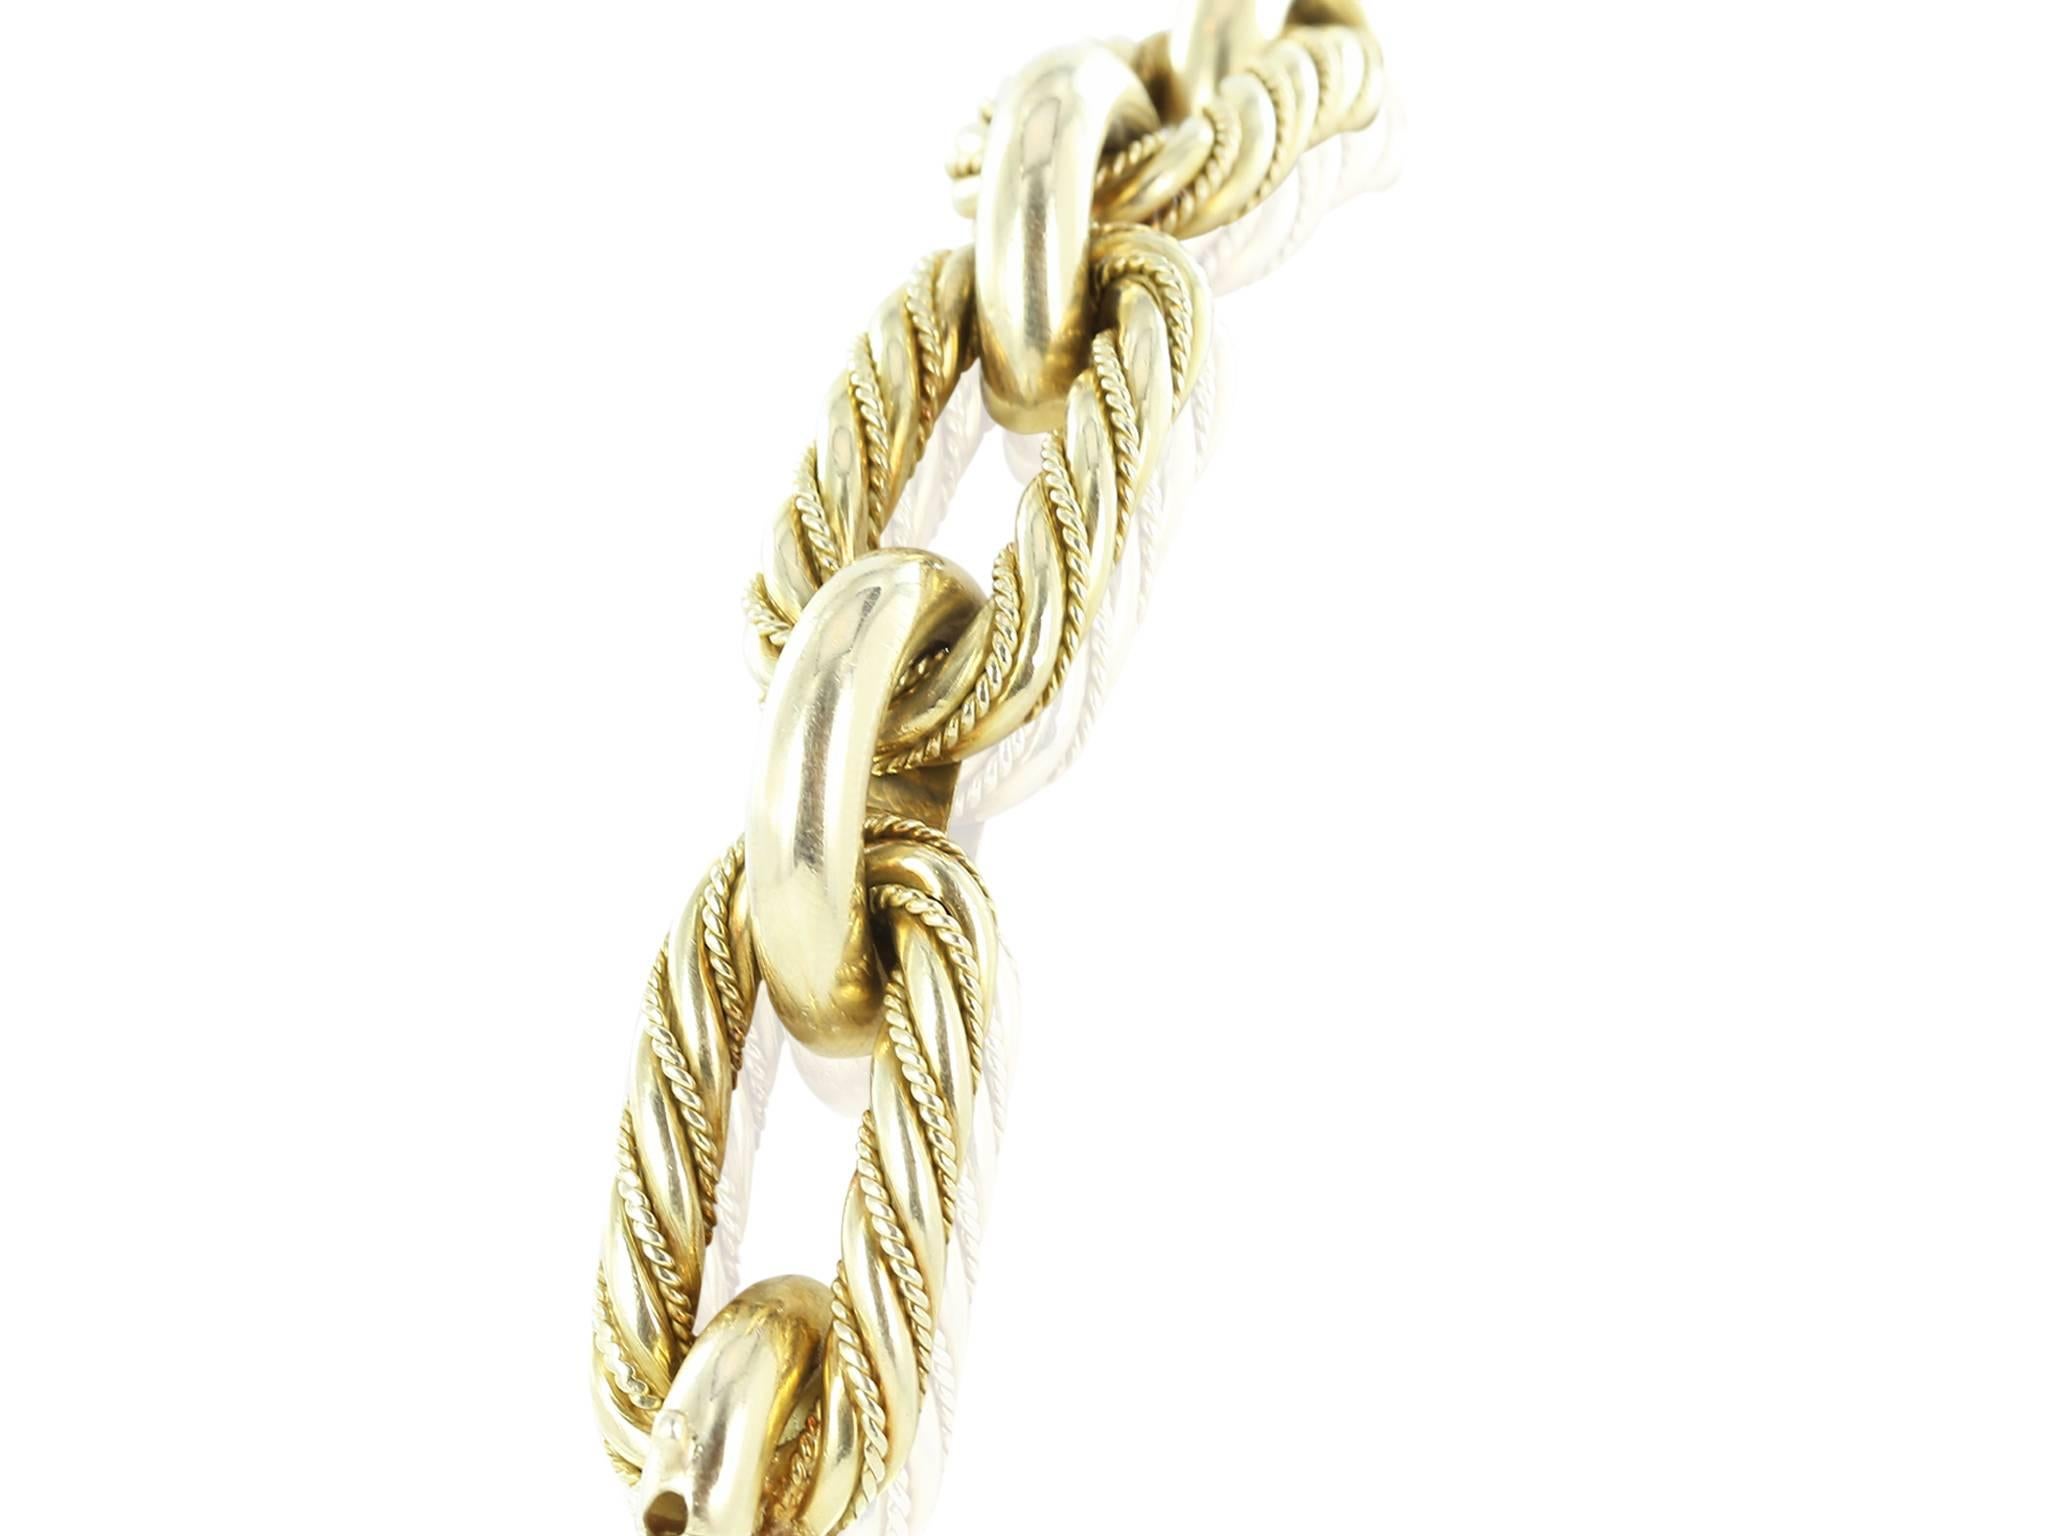  A beautiful 18 karat yellow gold link bracelet signed by Tiffany & Co. weighing 45.5dwt, The length is 8